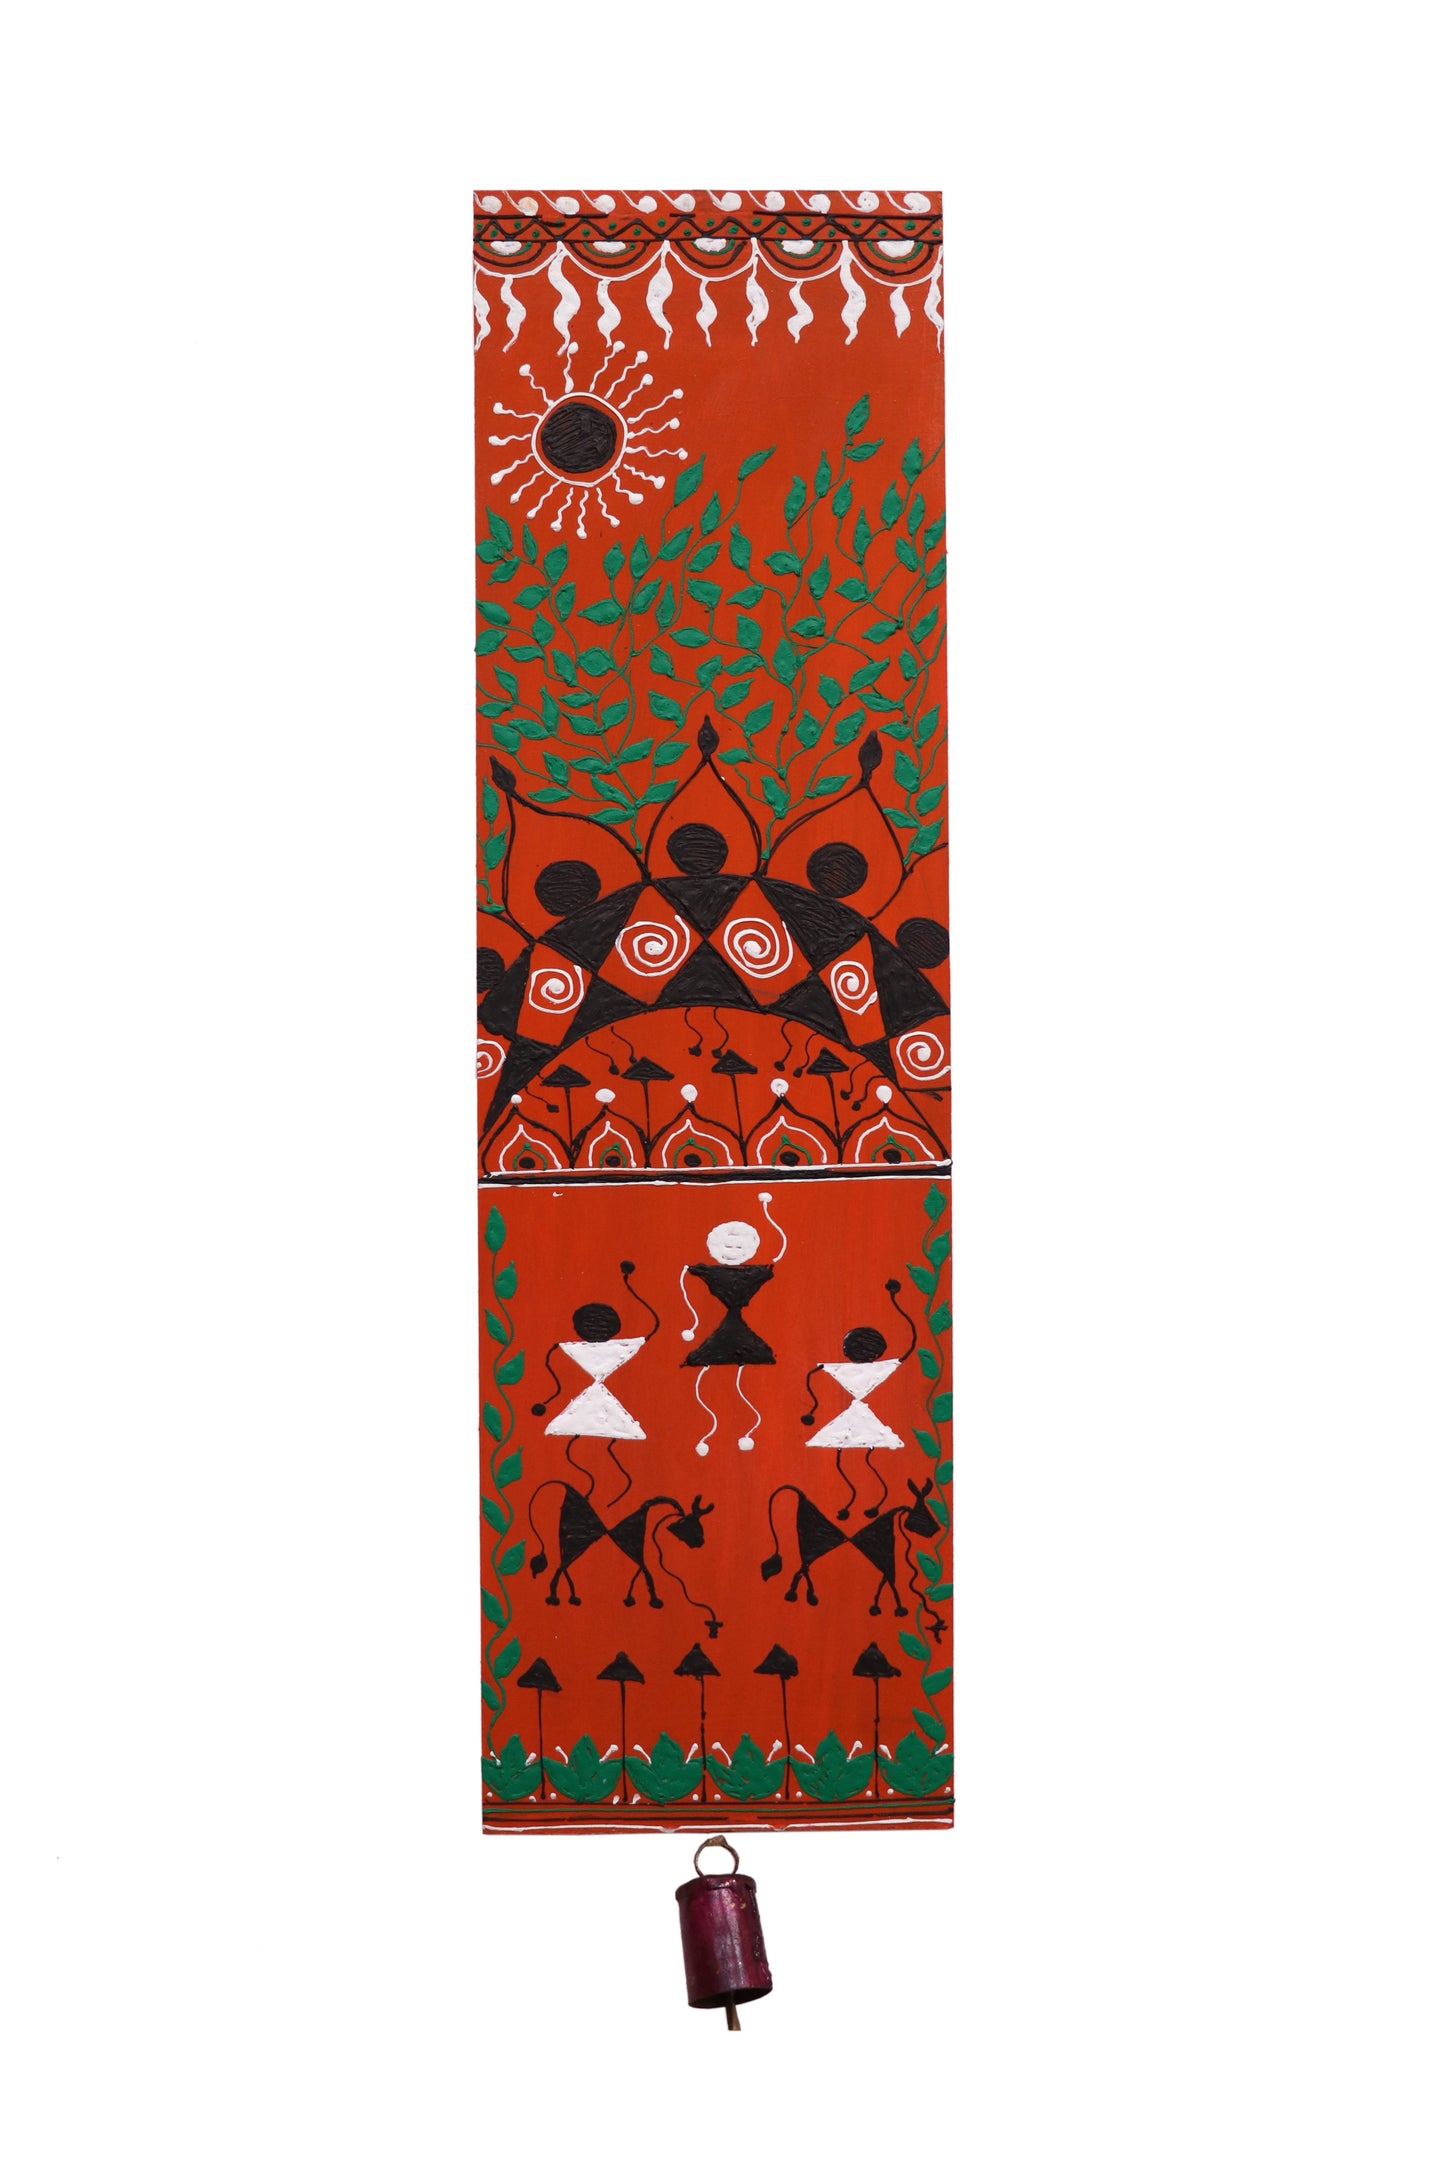 Handcrafted Red Warli Painting